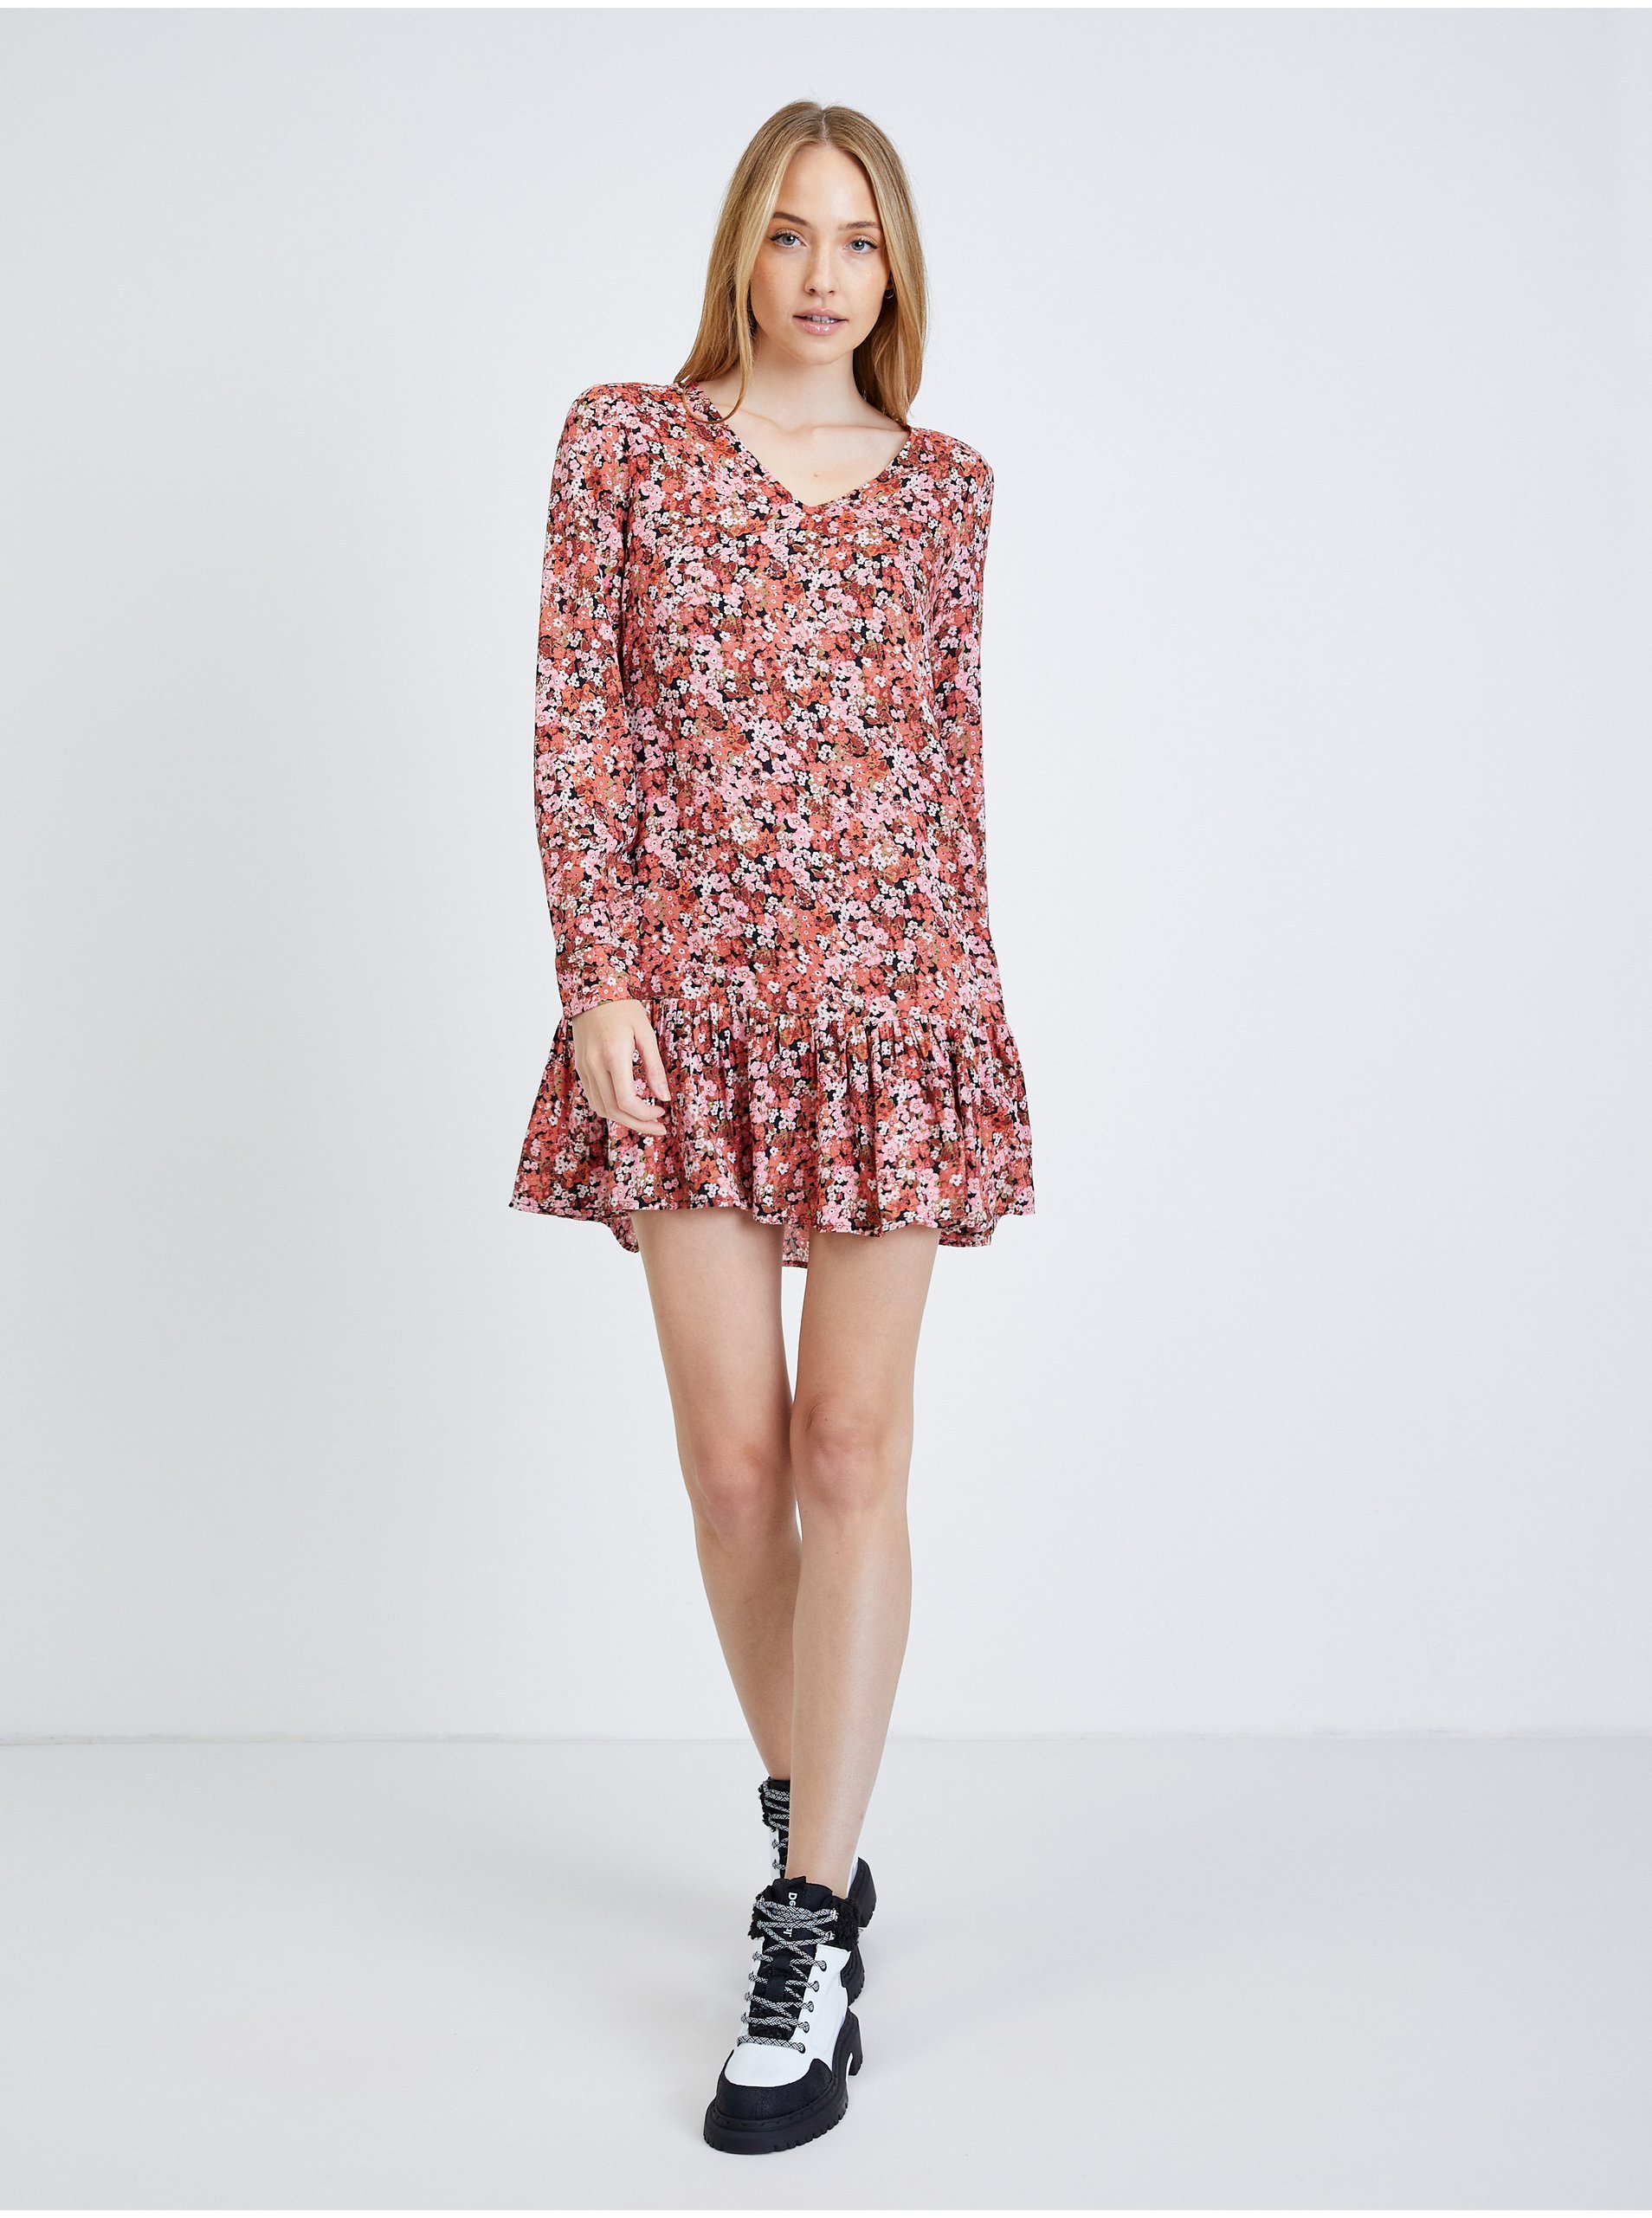 Red-pink Floral Dress Noisy May Bella - Women